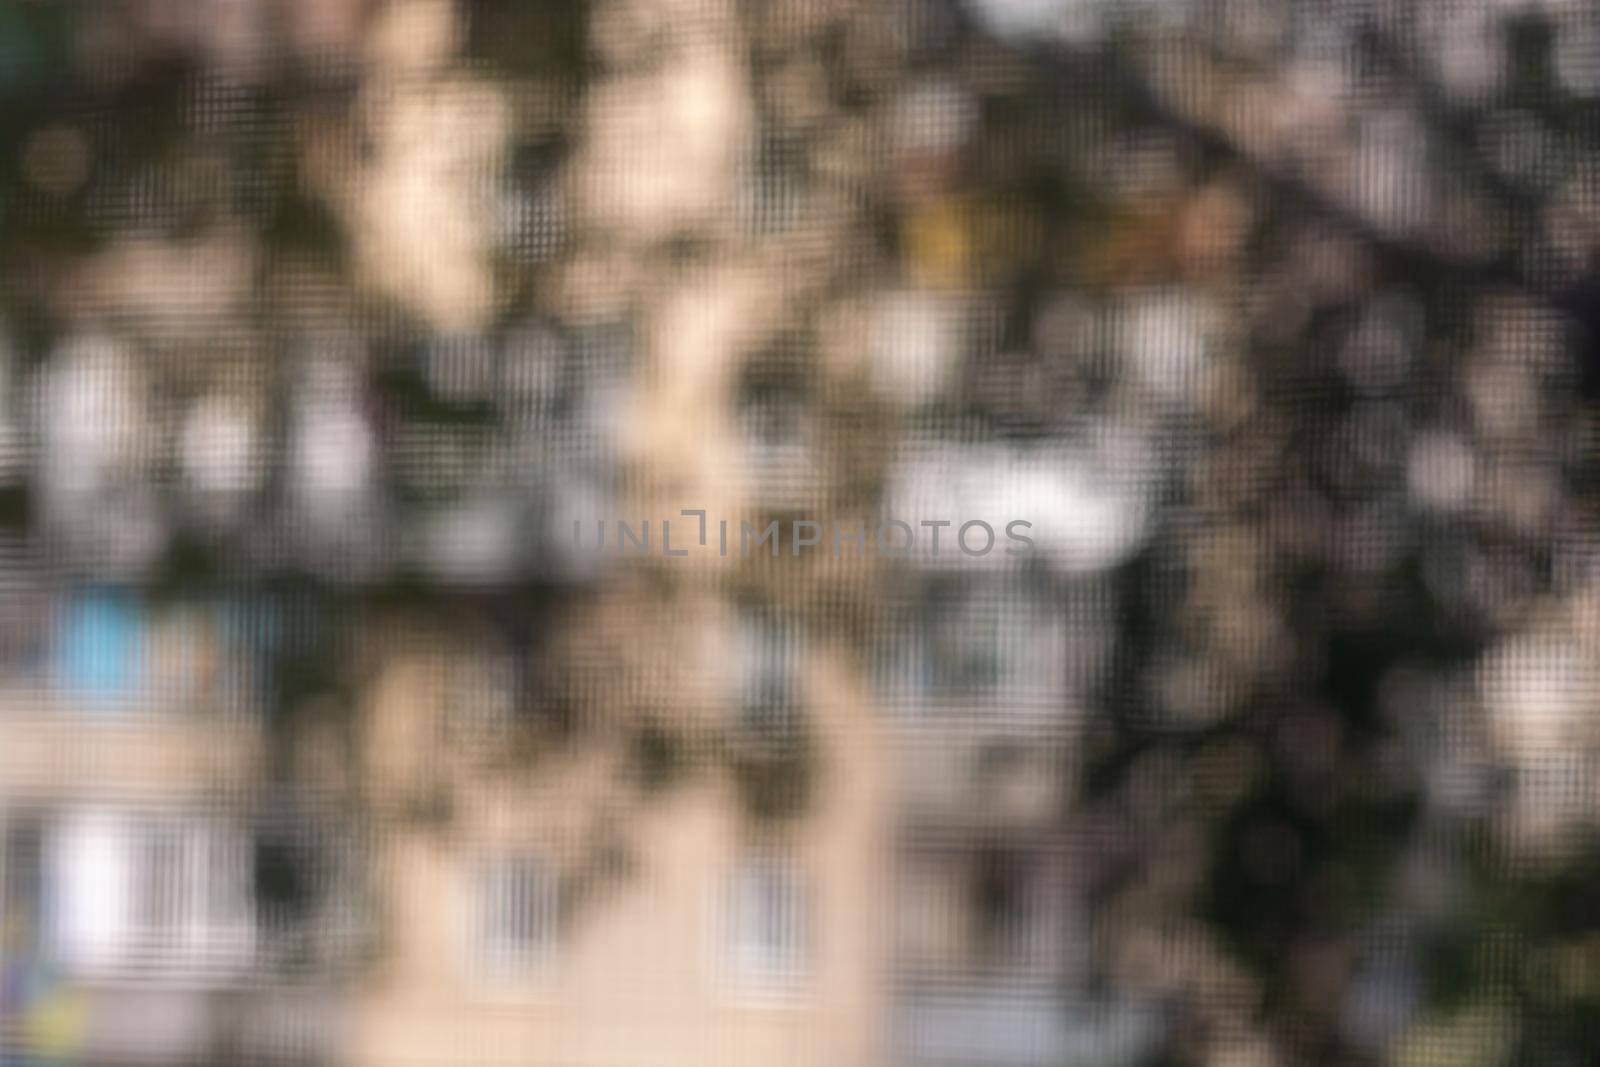 Blurred background through a mosquito net on a window made of walls, windows and leaves. City background. Backdrop